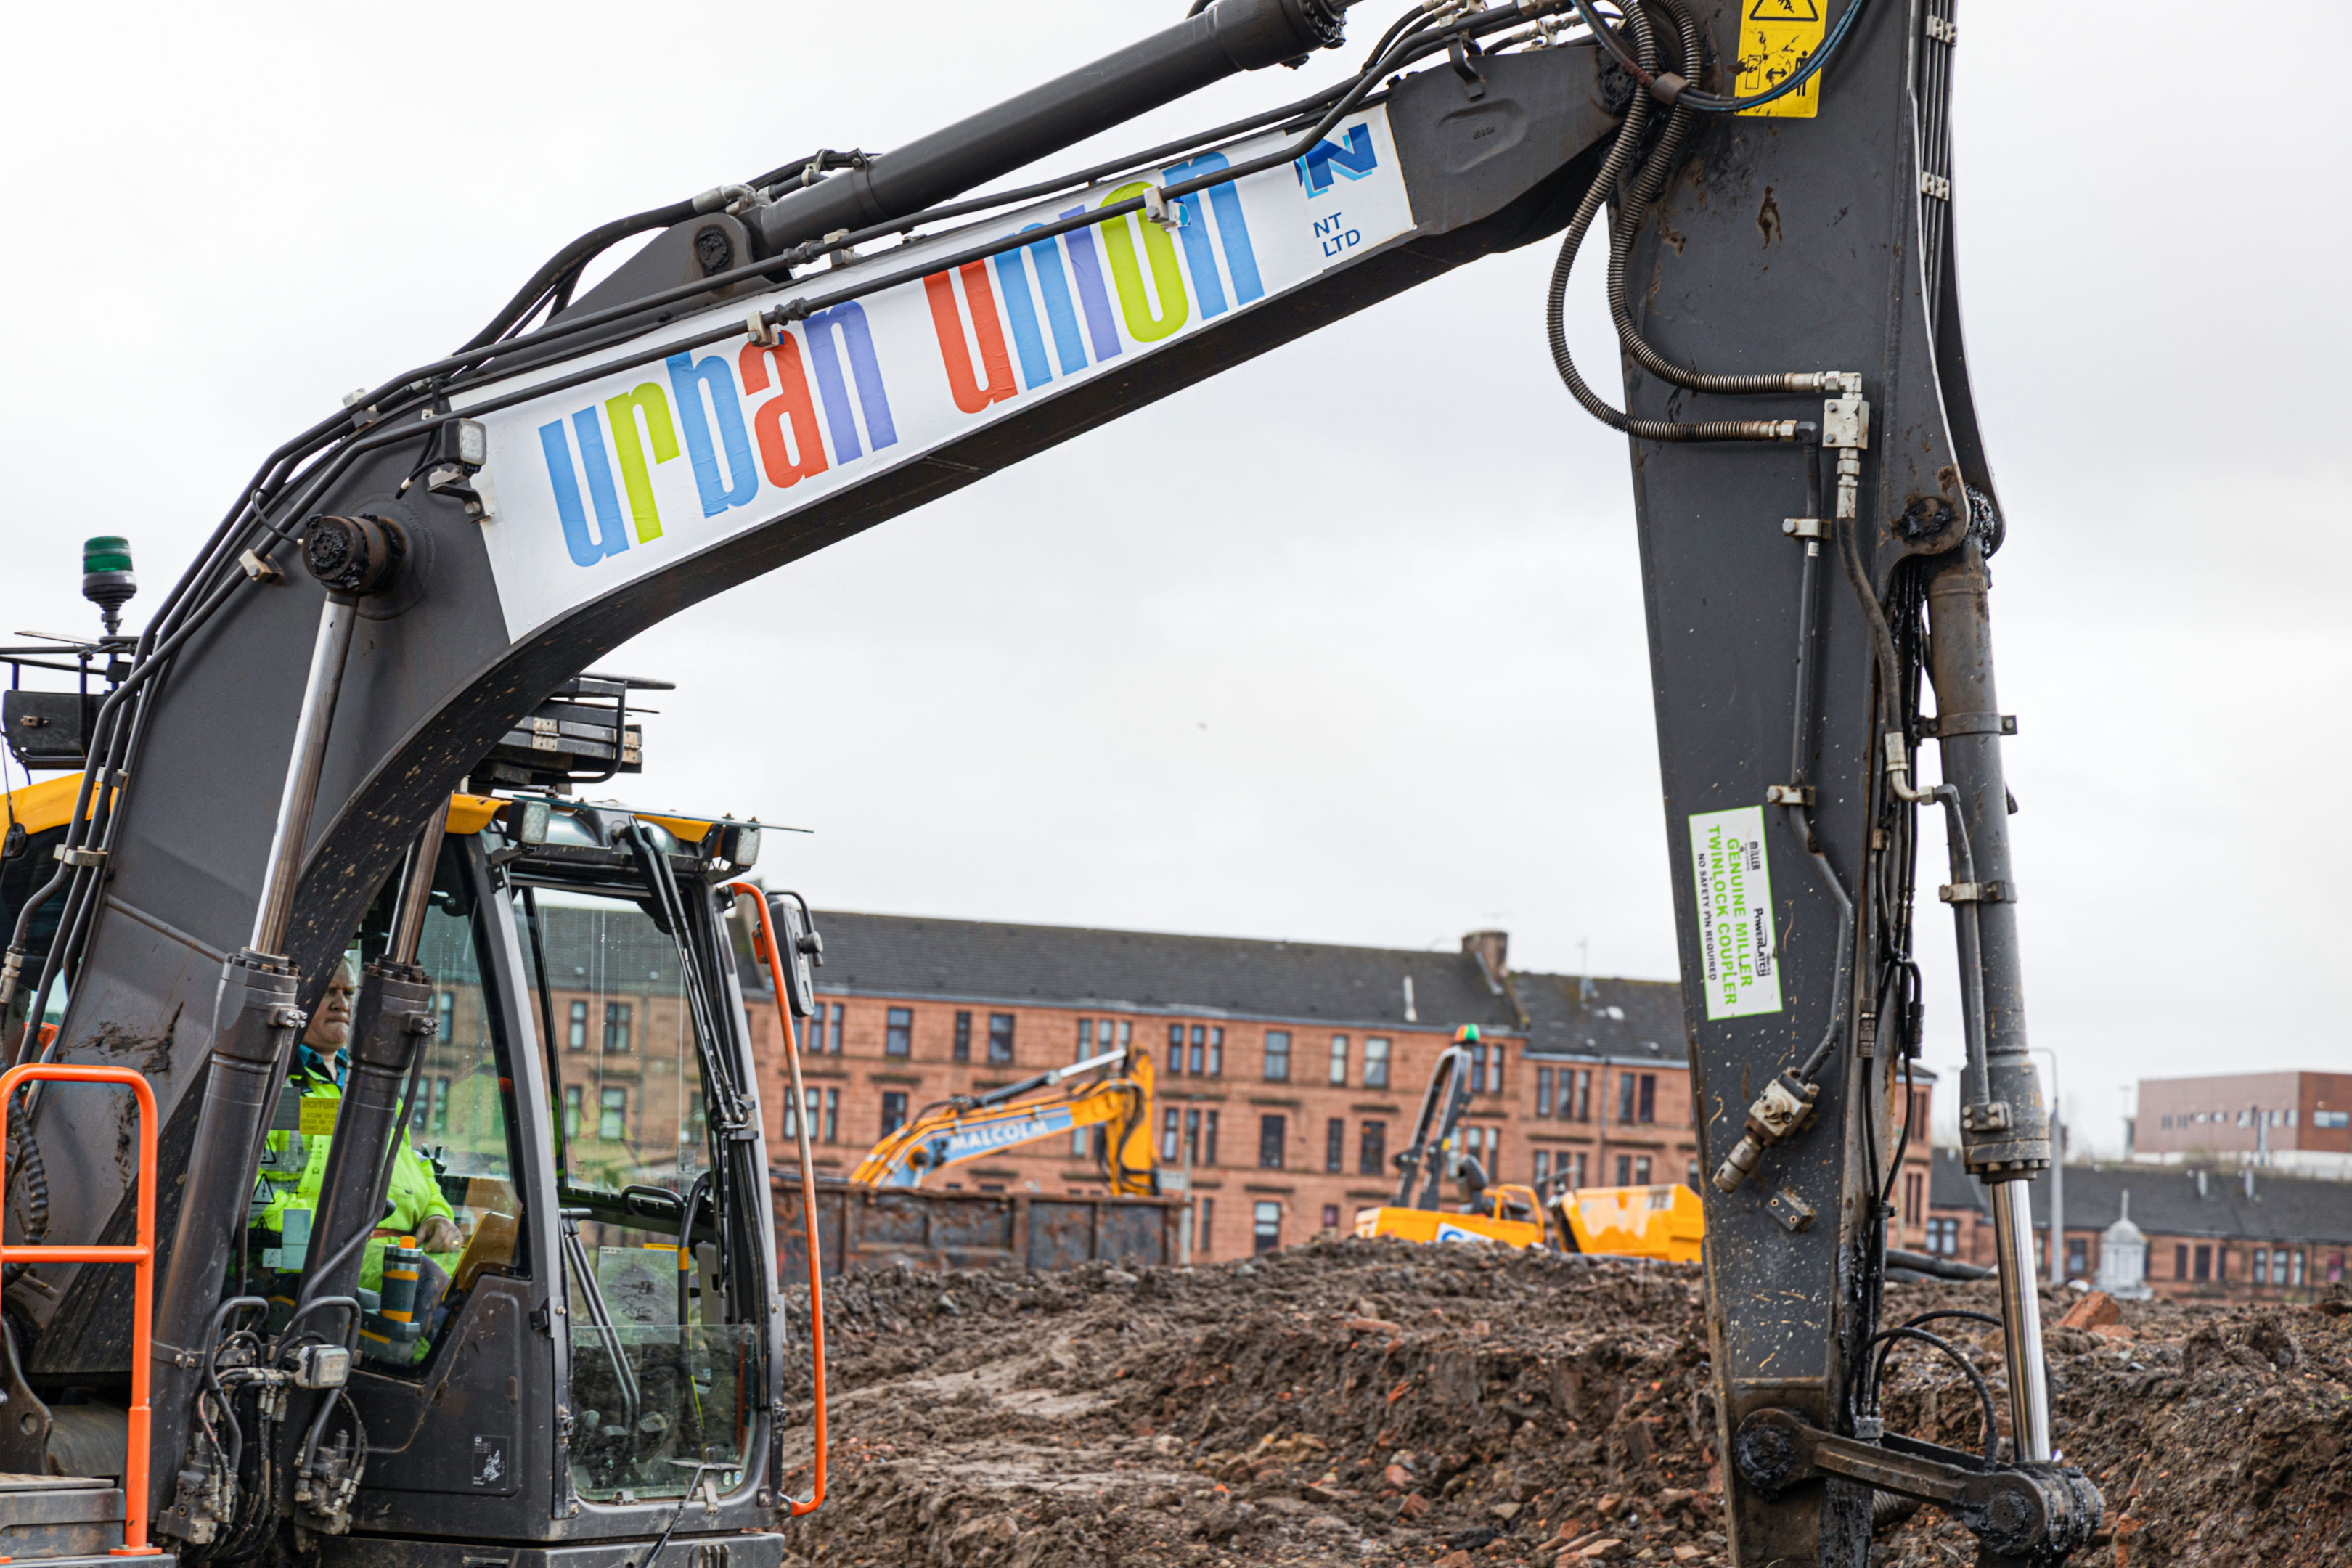 affordable housing being built in North of Glasgow housing development